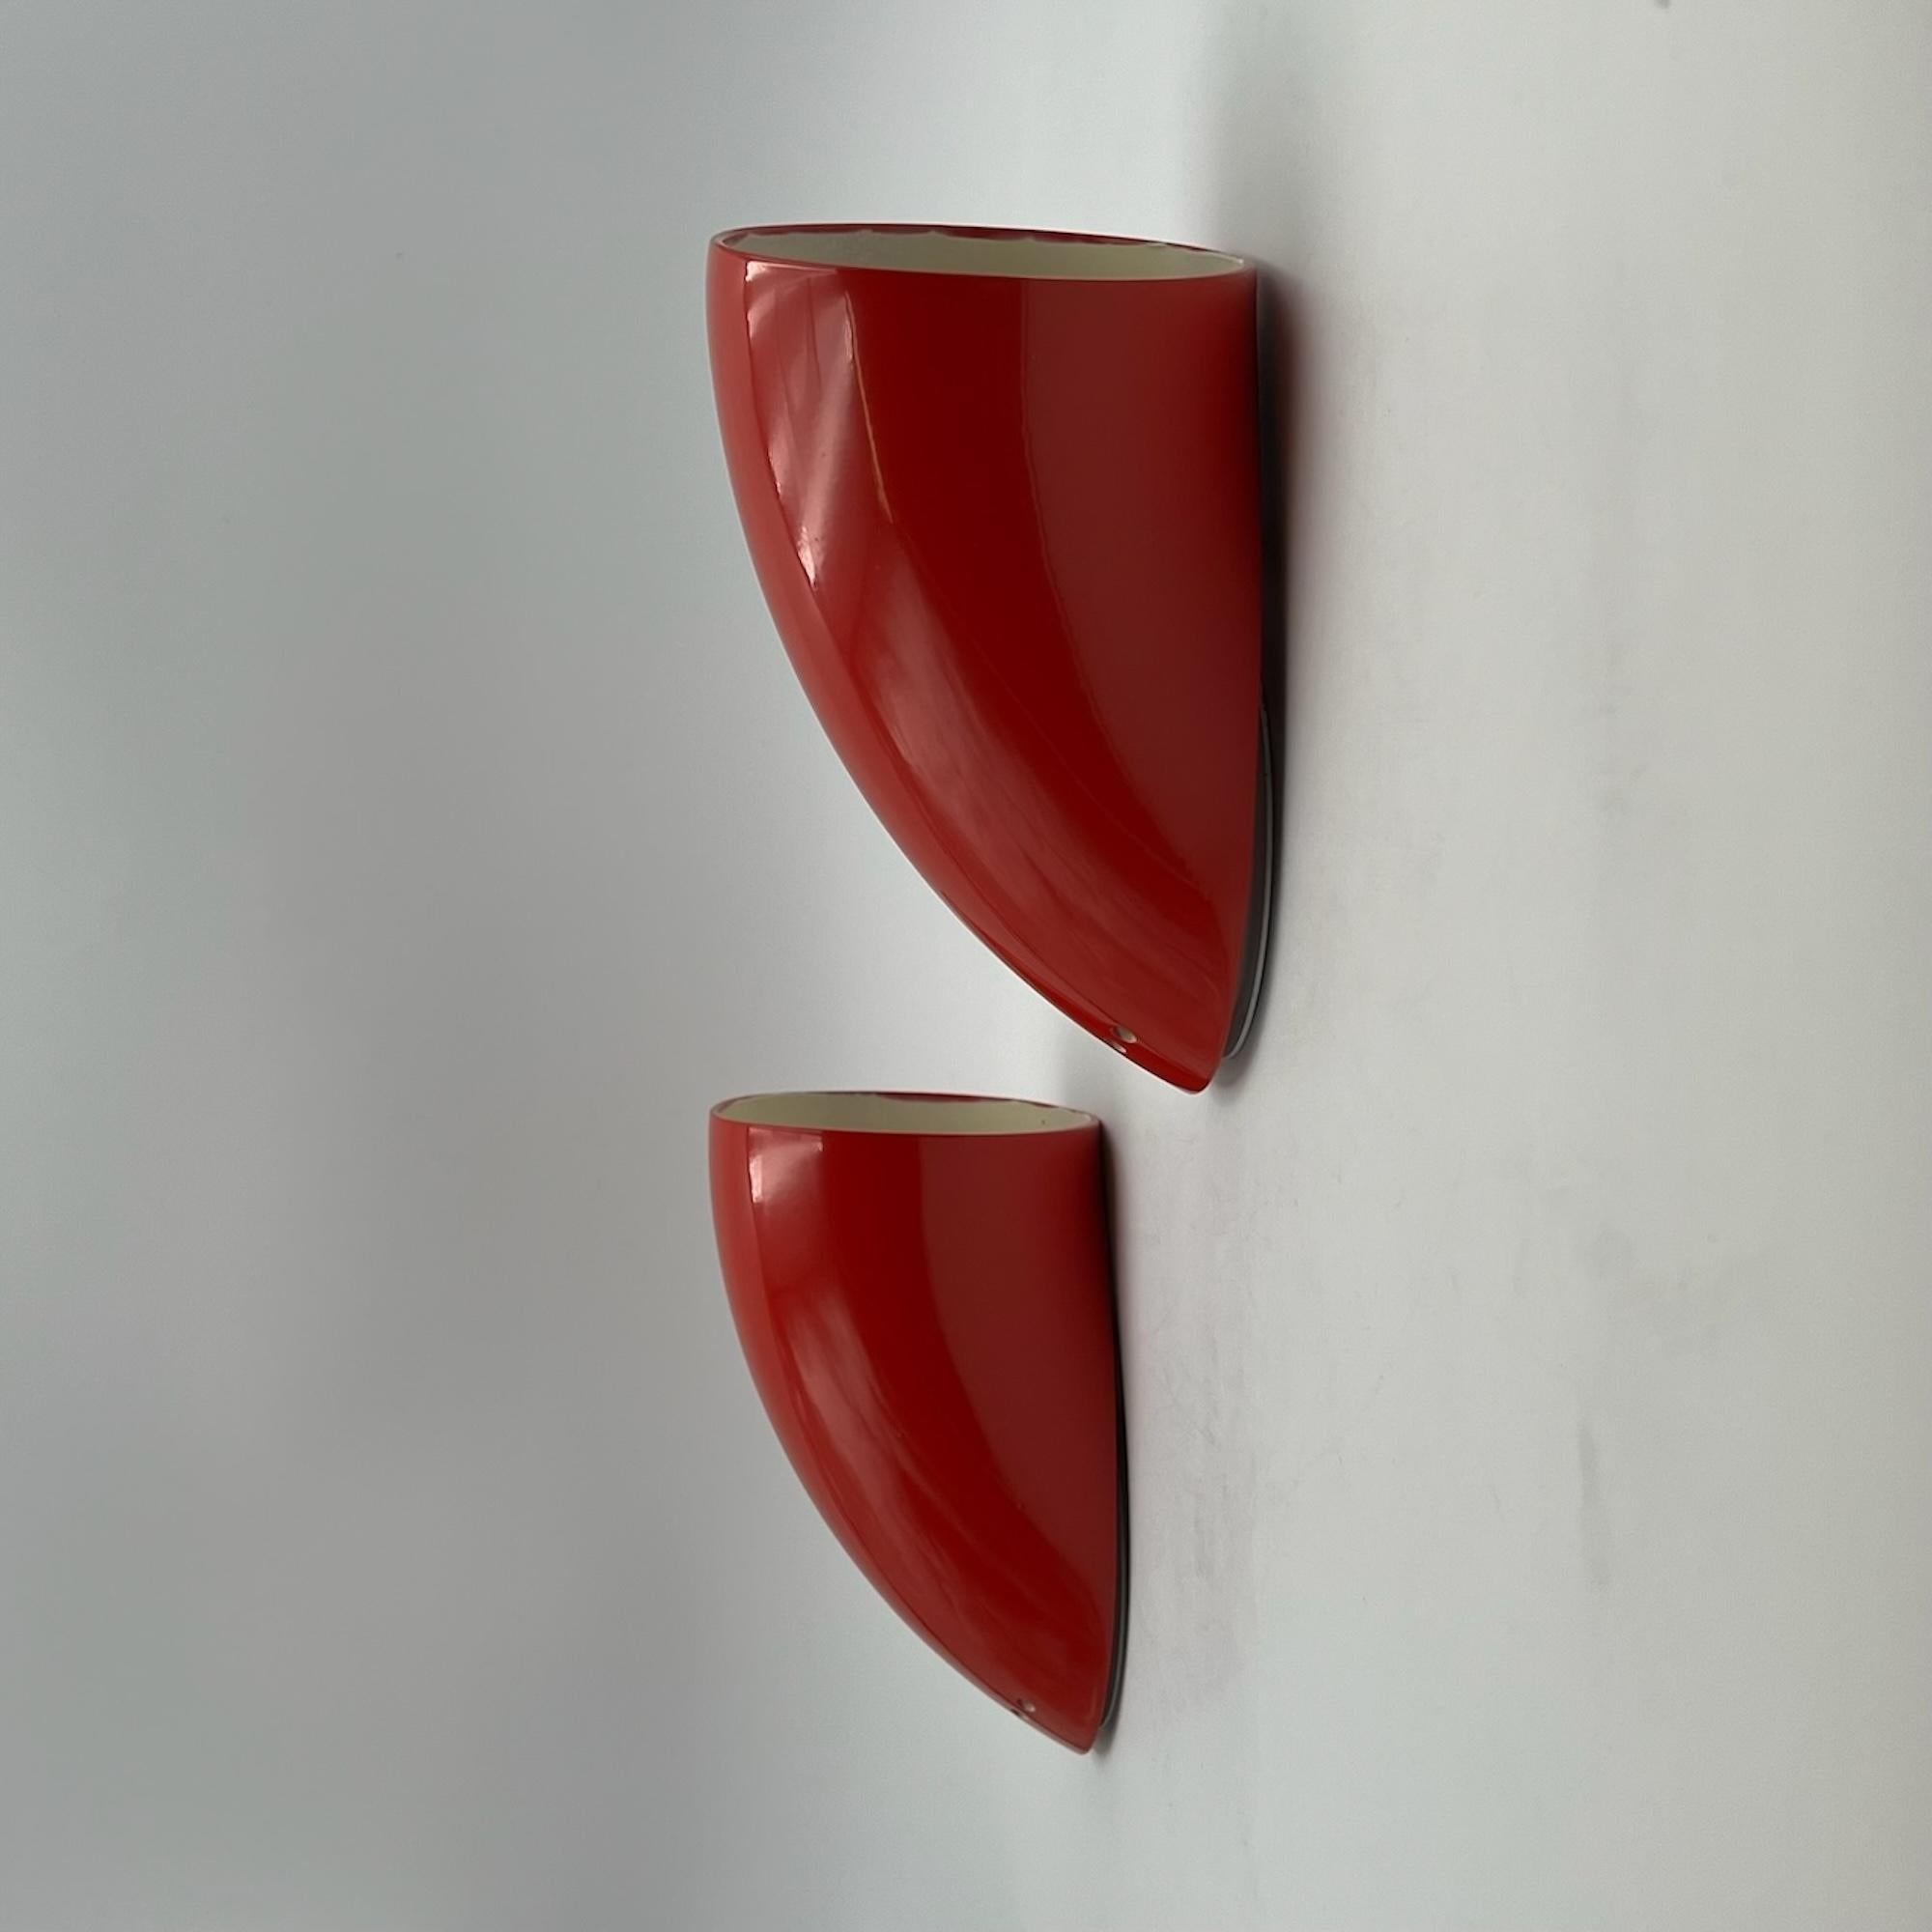 Gomito Wall Lamps by Elio Martinelli for Martinelli Luce in Red, 1970s, Set of 2 For Sale 3